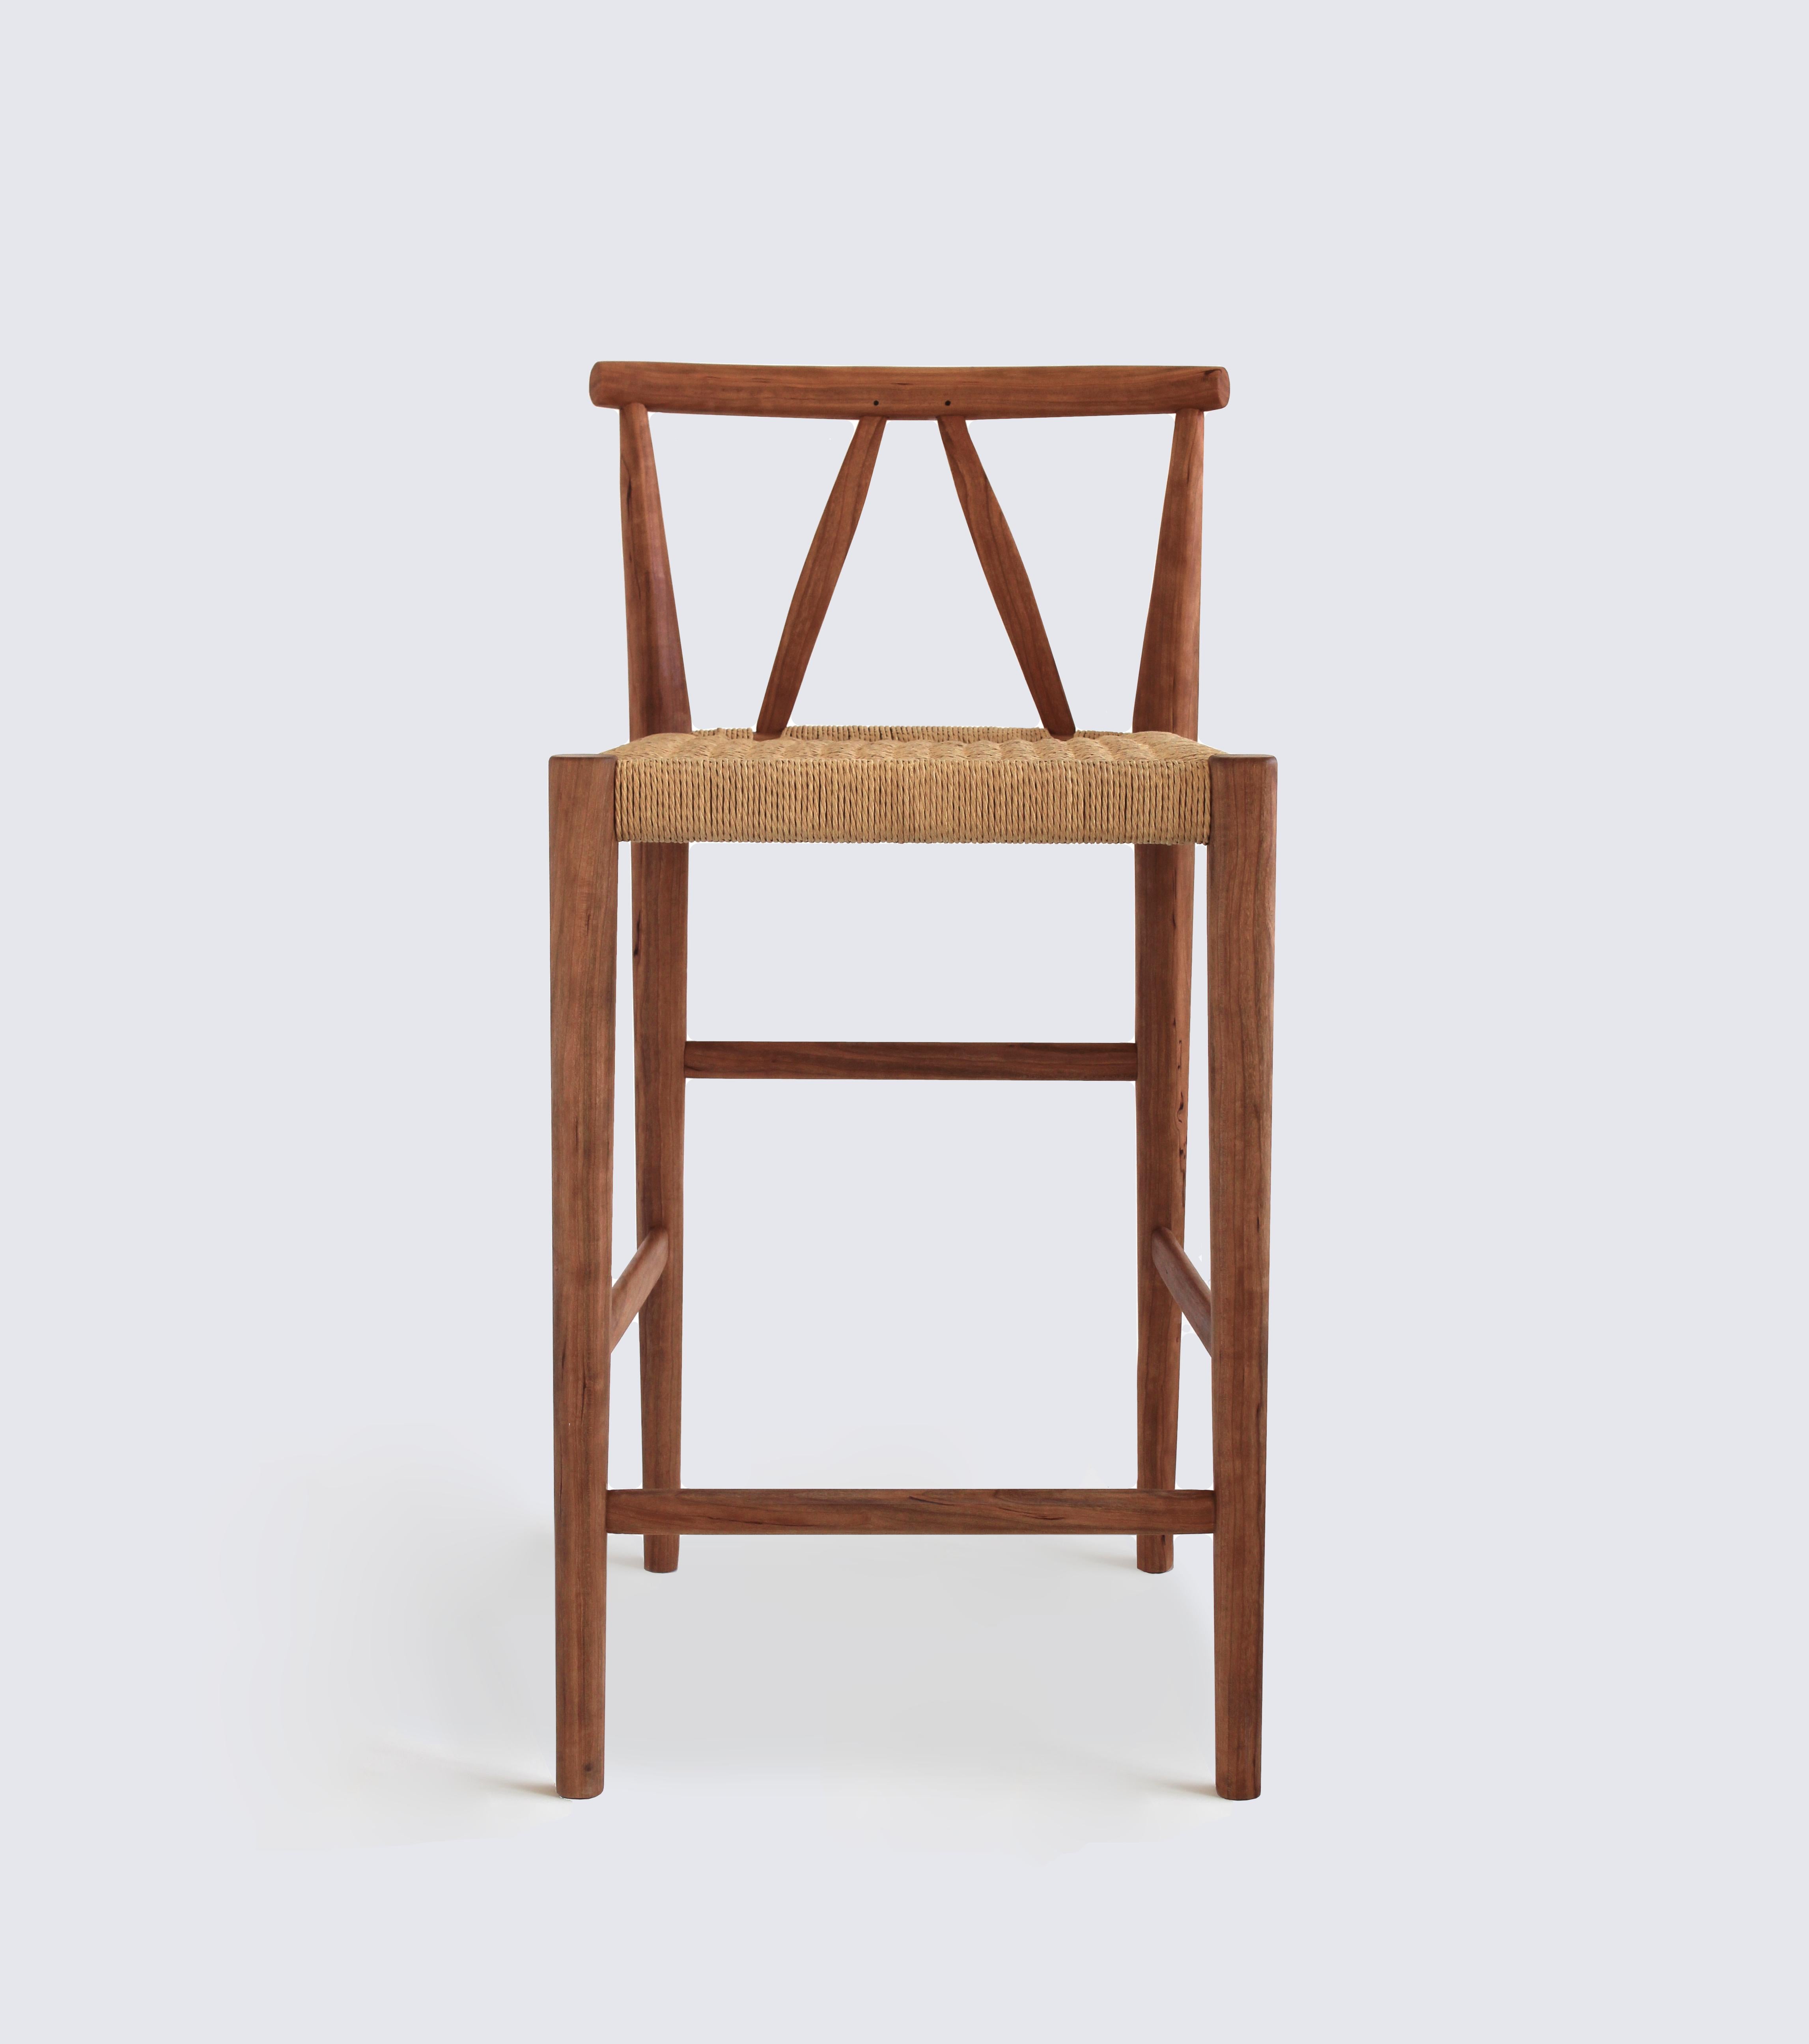 The Winona counter stool is a comfortable and elegant seating option for any kitchen island or bar. Each stool is joined, carved and shaped by hand to produce a strong and lightweight structure. The Danish cord seat is woven directly to the stool's